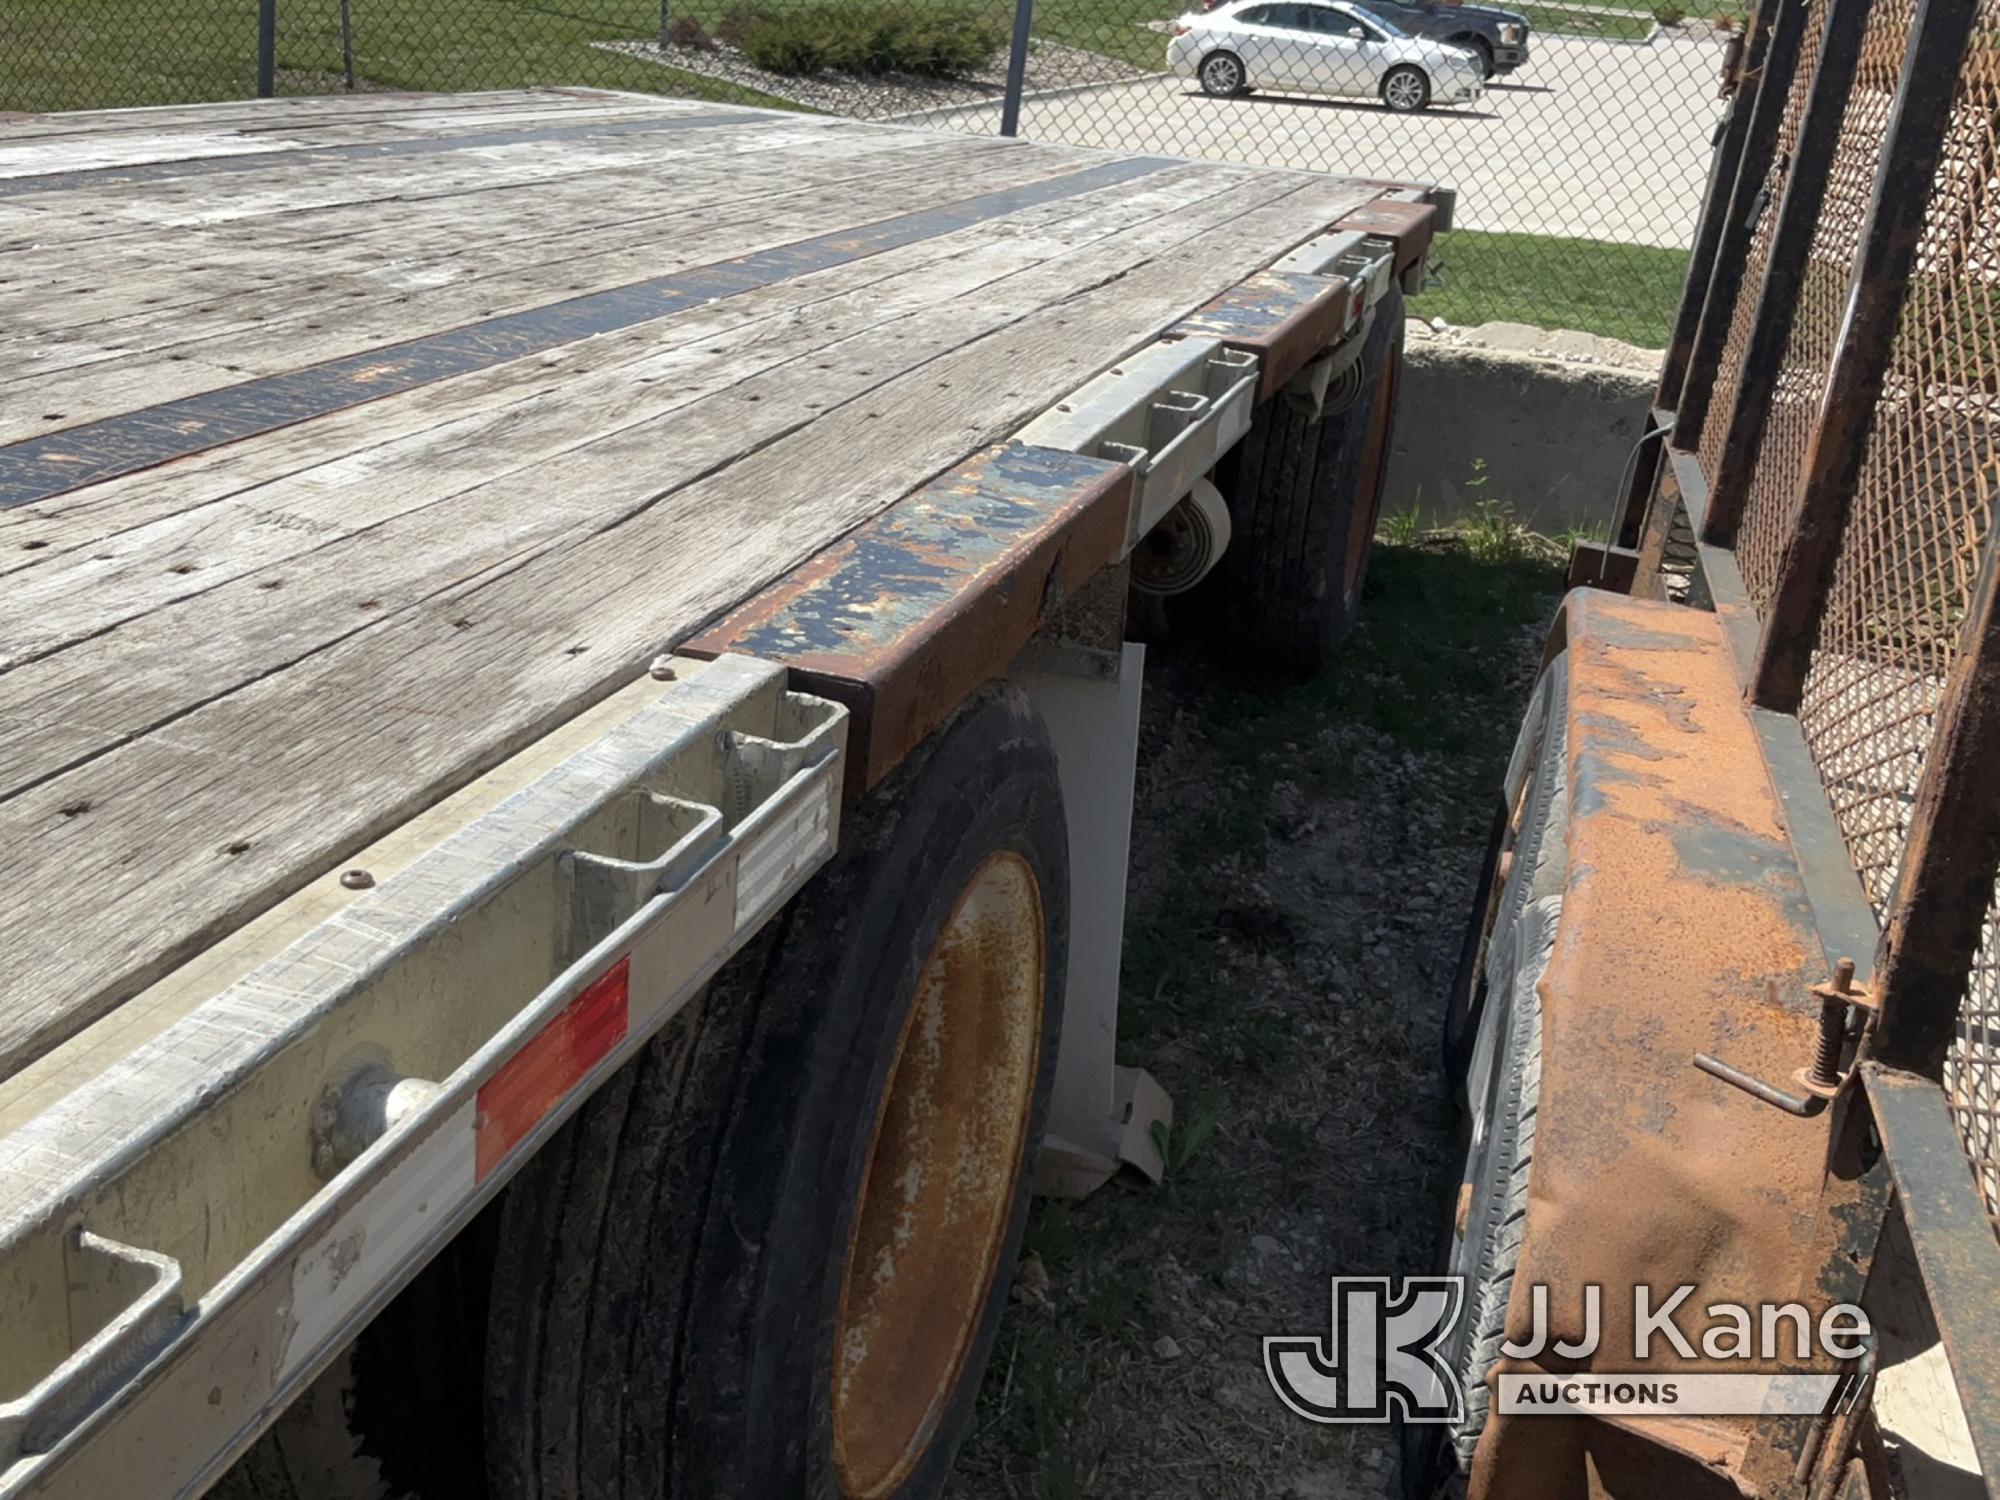 (Des Moines, IA) 2009 Great Dane 50ft GPD-0024-00099 Drop-Deck Flatbed Trailer Seller States: Will N